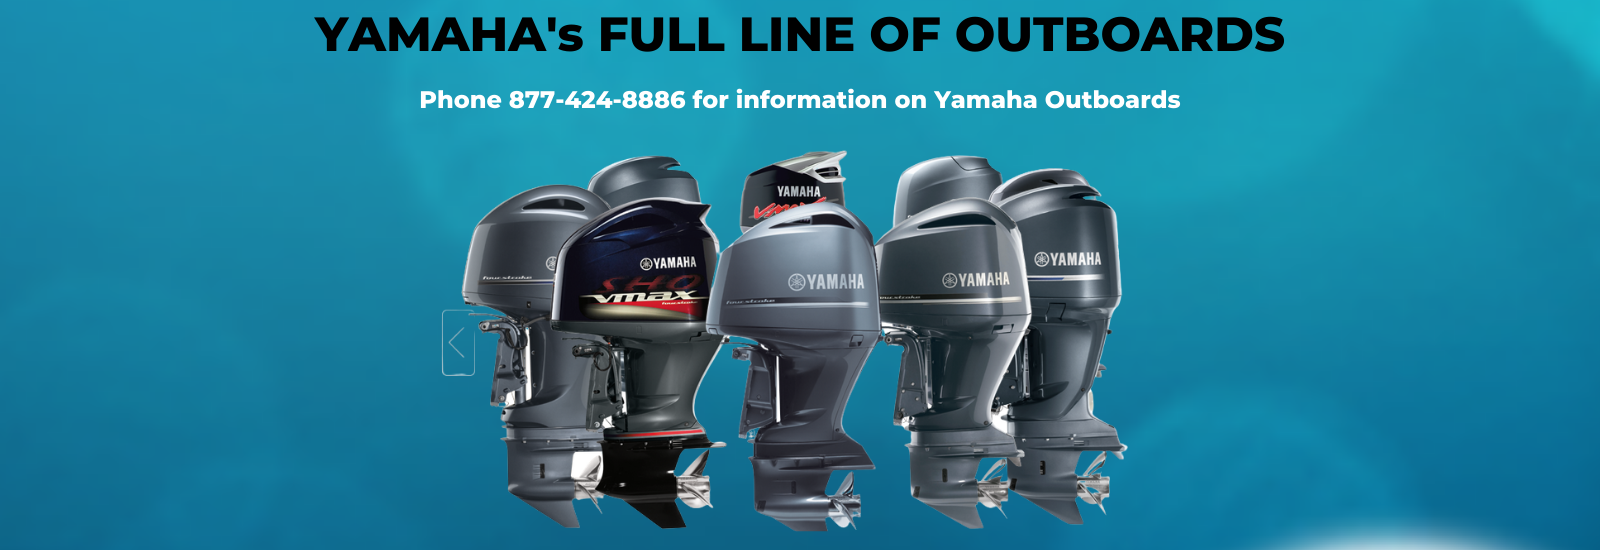 Yamaha's Full Line Of Outboards